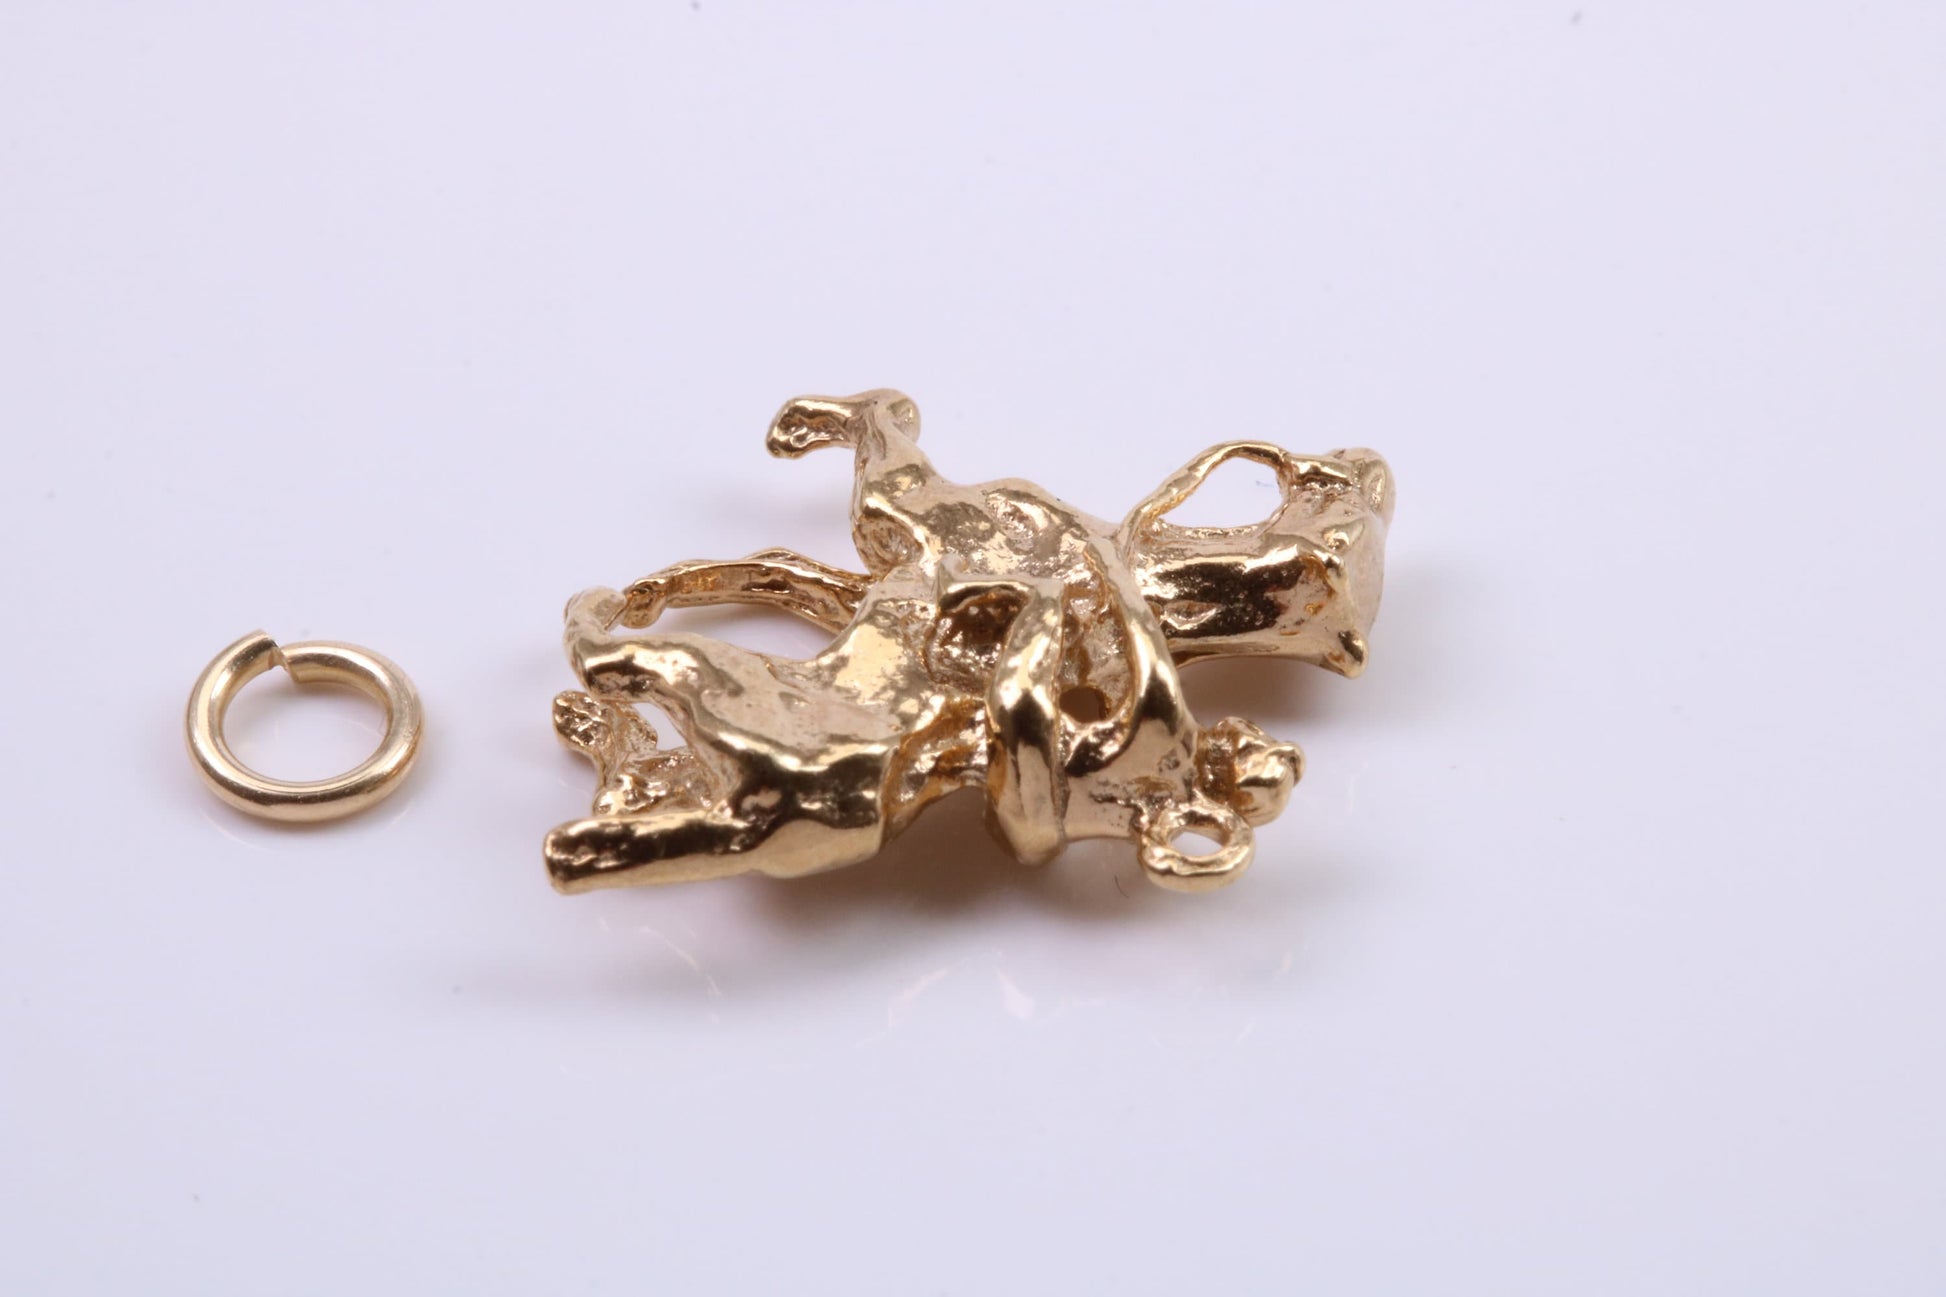 Jockey on Horse Charm, Traditional Charm, Made from Solid 9ct Yellow Gold, British Hallmarked, Complete with Attachment Link